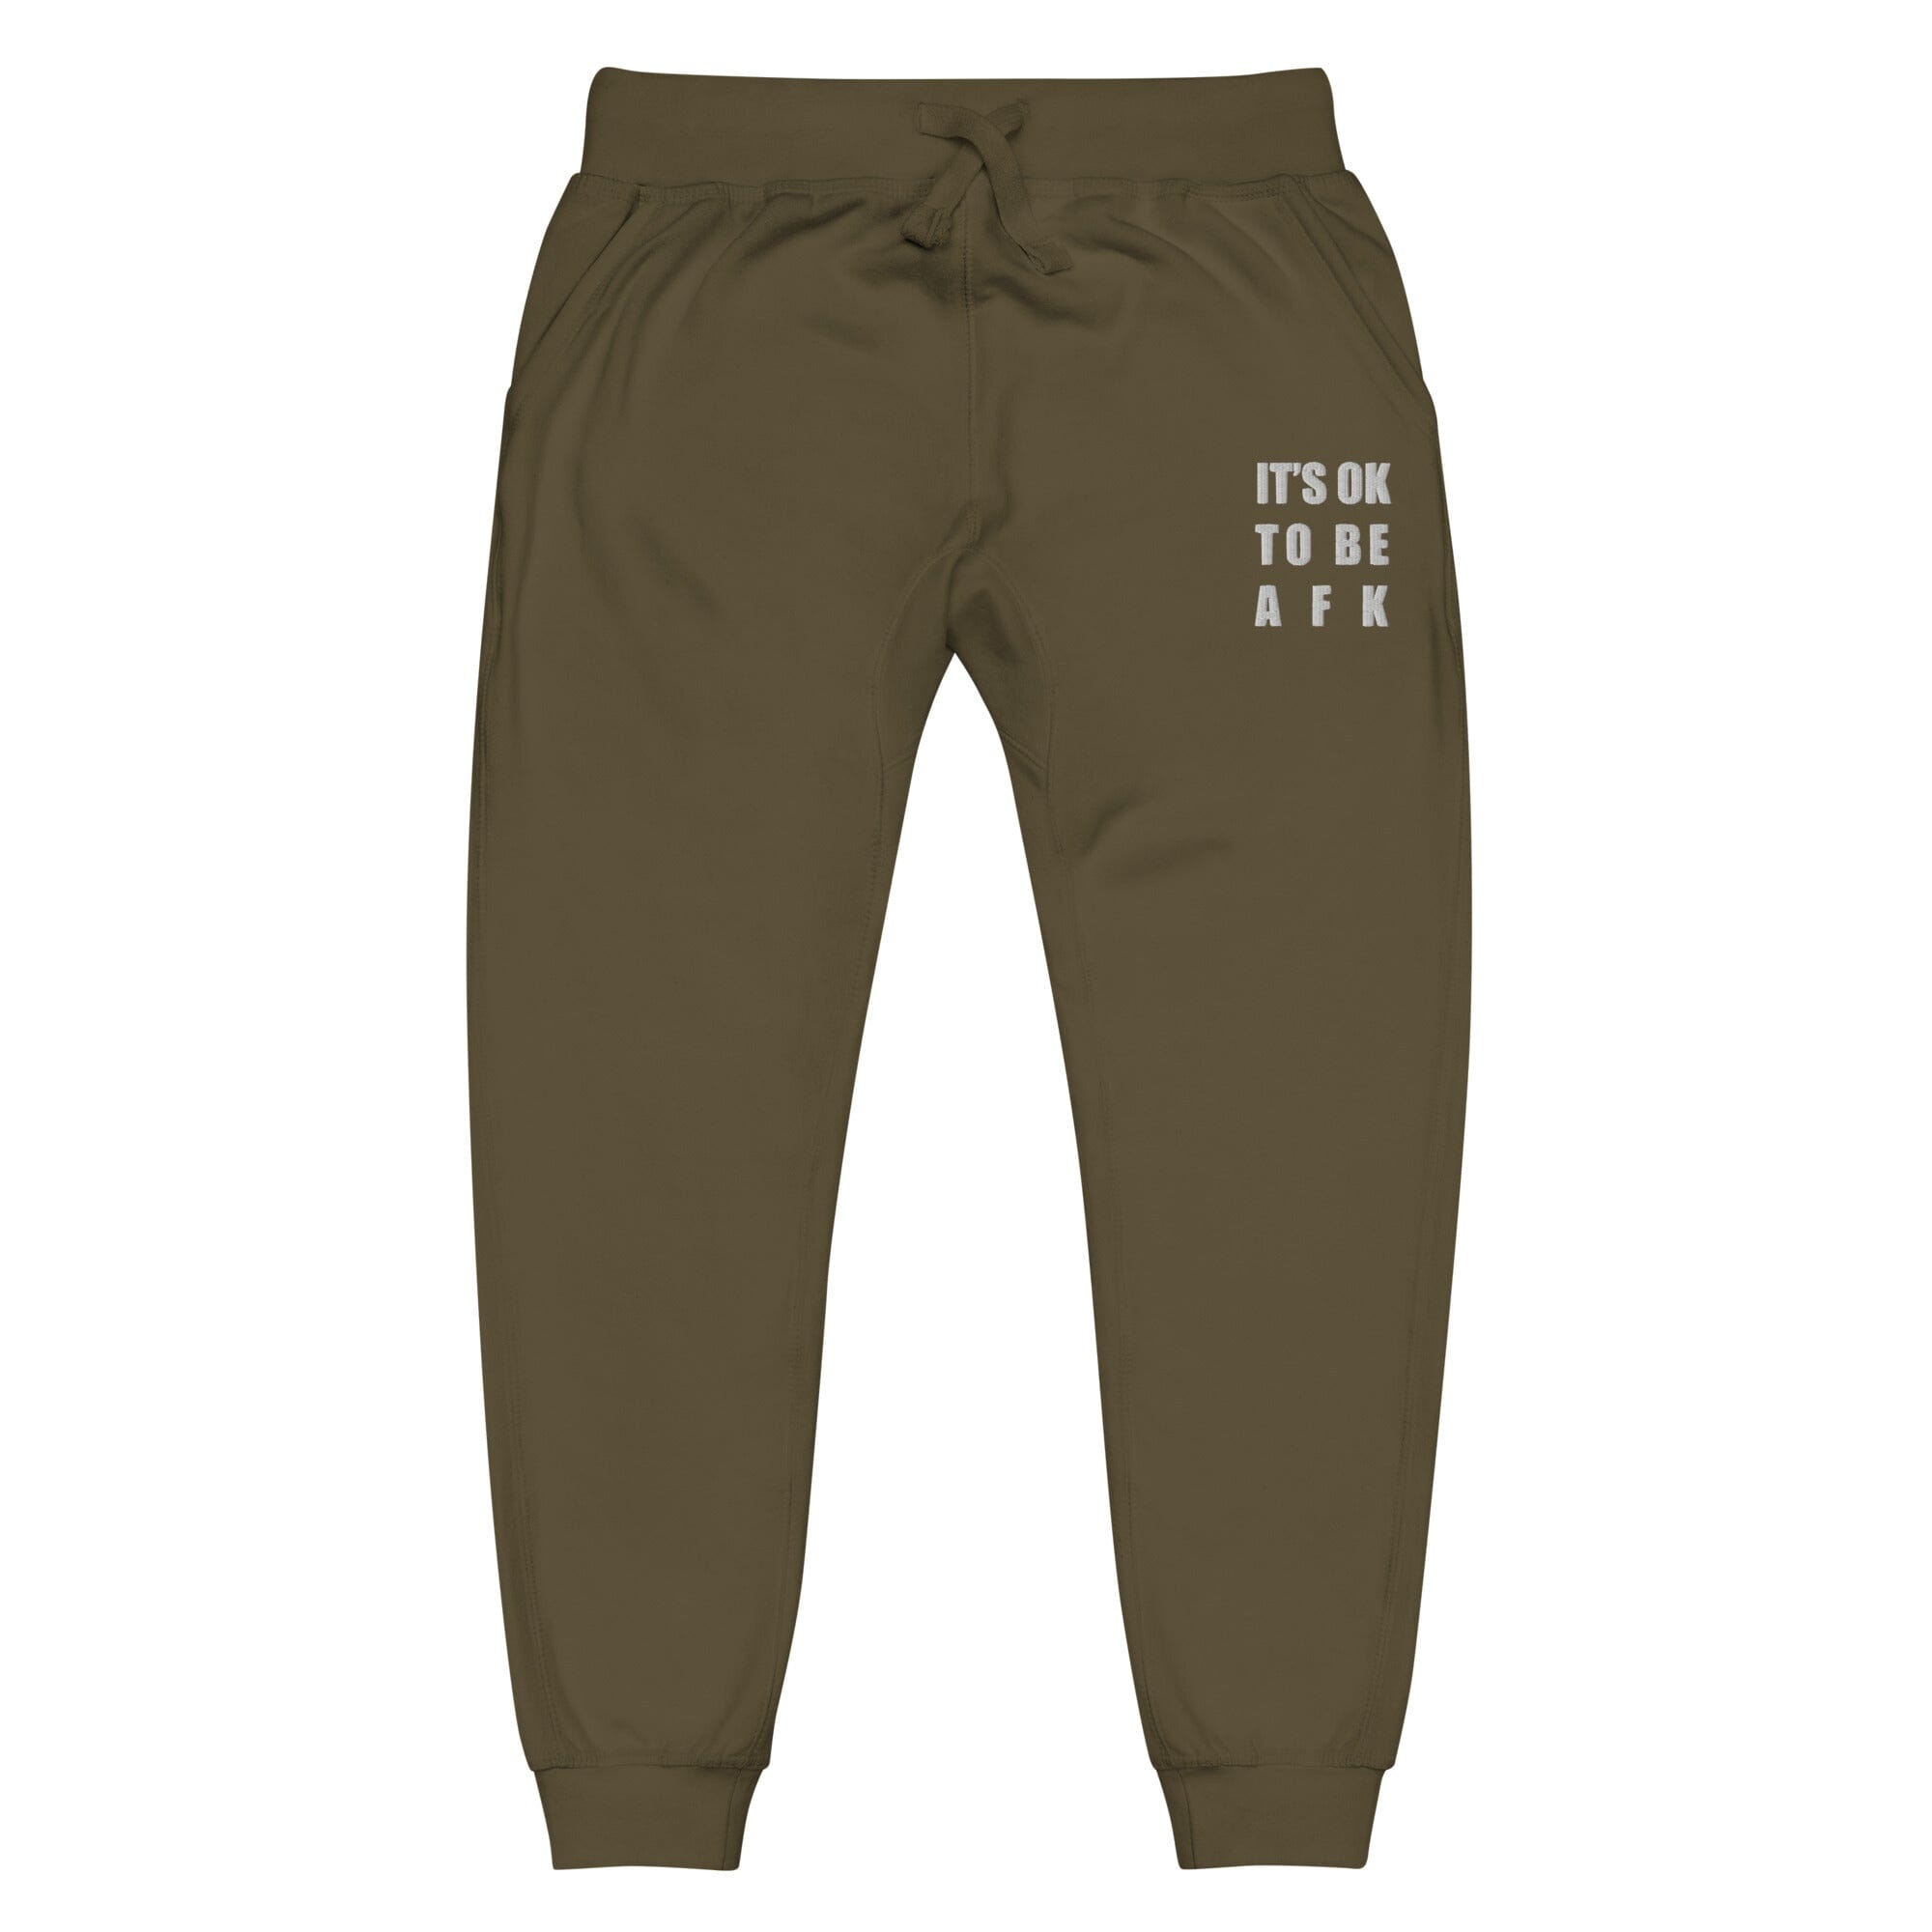 It's Ok to be AFK | Unisex fleece sweatpants | Gamer Affirmations Threads & Thistles Inventory Military Green XS 